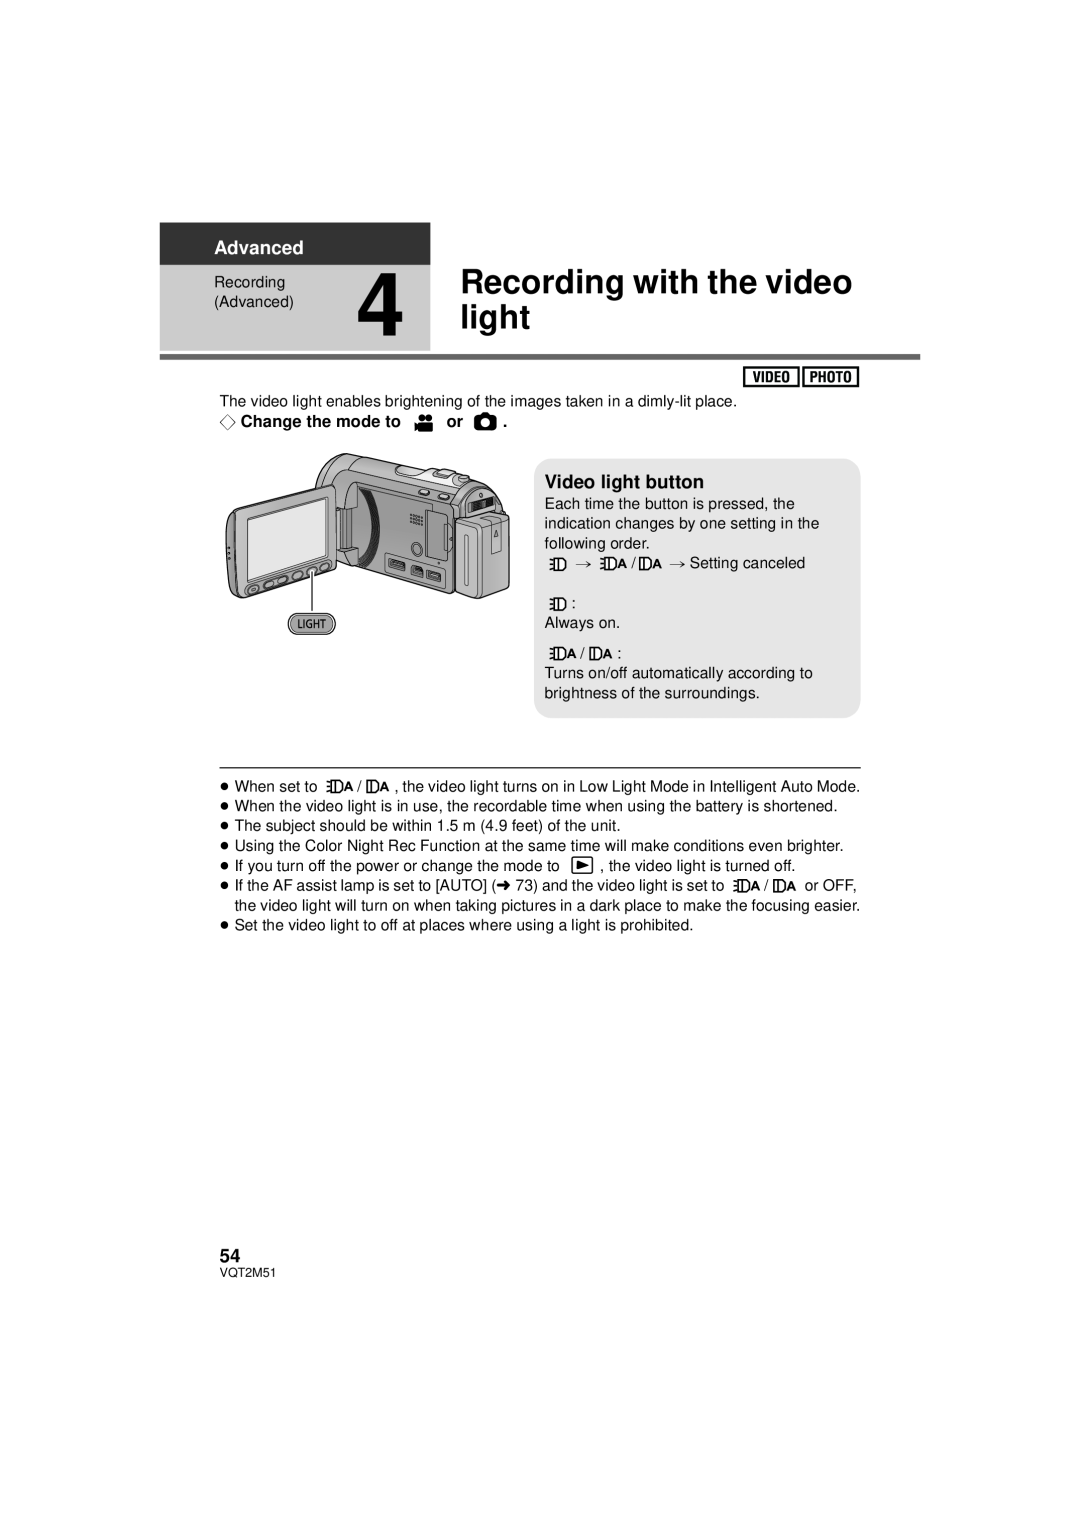 Panasonic HDC-TM55P/PC, HDC-SD60P/PC Recording with the video, Video light button, Advanced, ¬ Change the mode to or 